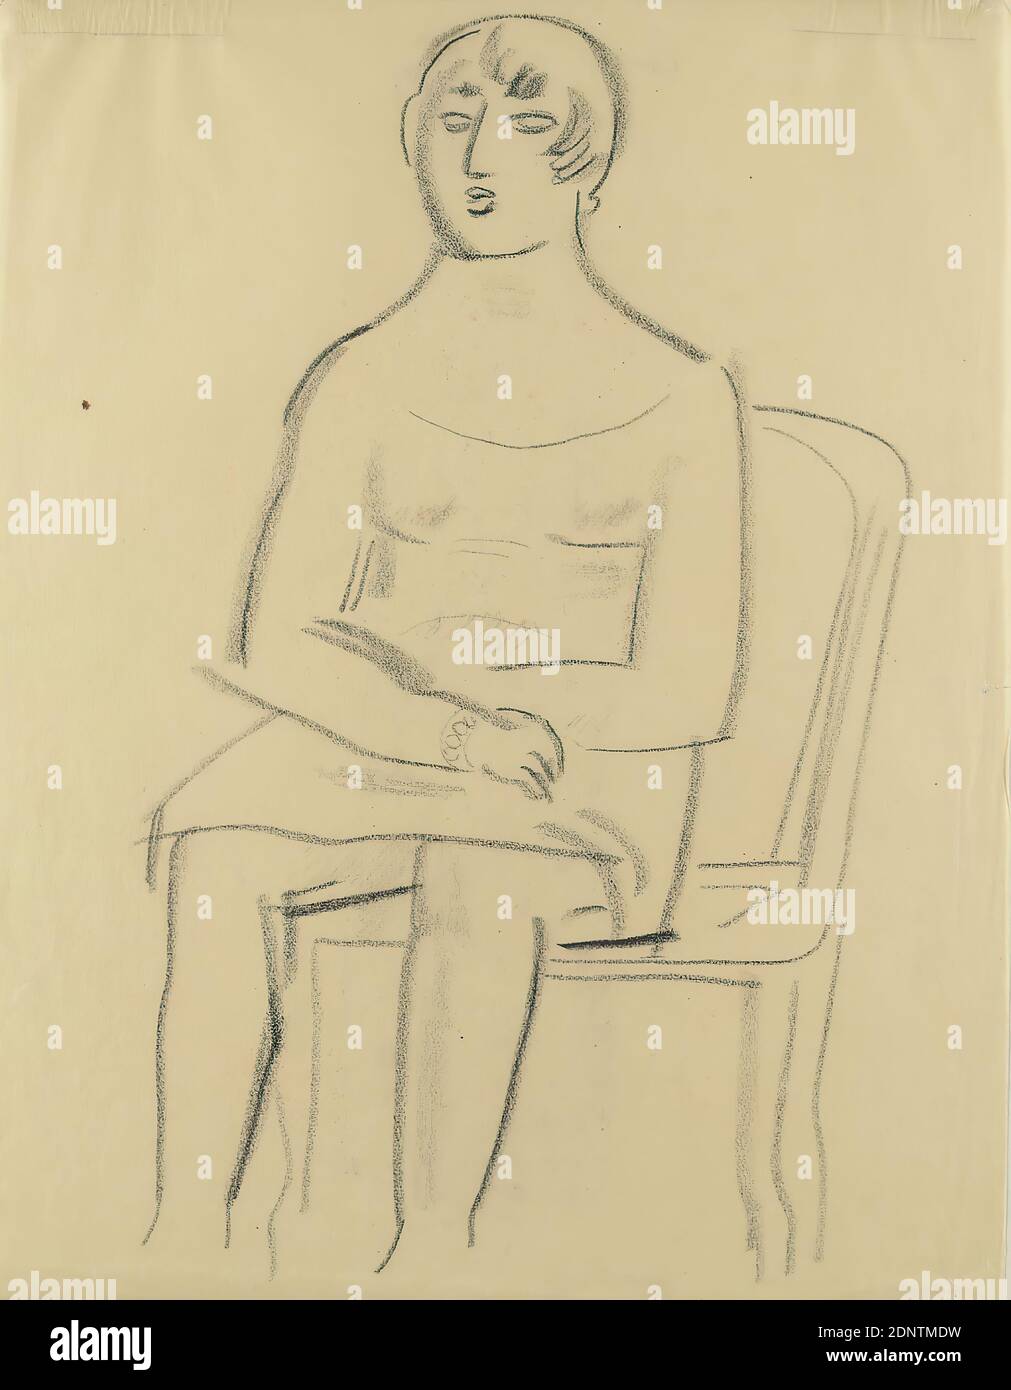 Gustav Heinrich Wolff, Sitting woman, parchment, charcoal for drawing, drawing, charcoal on parchment, total: height: 30.1 cm; width: 23.4 cm, unmarked, sketches, drawing, graphics, portrait, woman, seated figure, chair, Classic Modernism, sketch of a woman sitting on a chair in a dress with short hair and with arms crossed on her lap, single sheet from a sketchbook (1920s Stock Photo